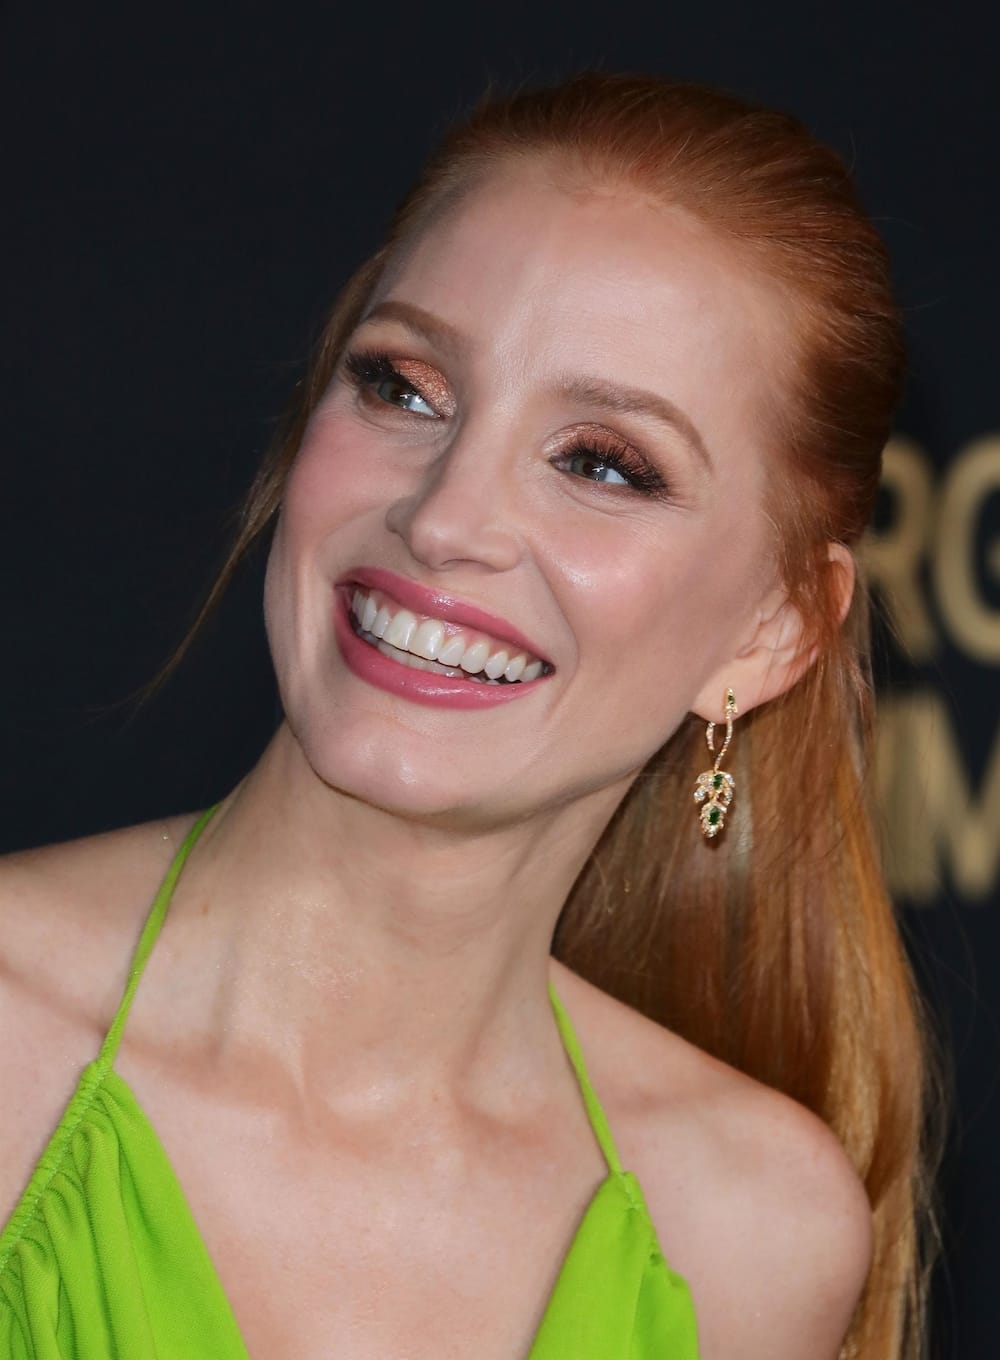 Radiant Jessica Chastain in Michael Kors for ‘George & Tammy’ LA Premiere